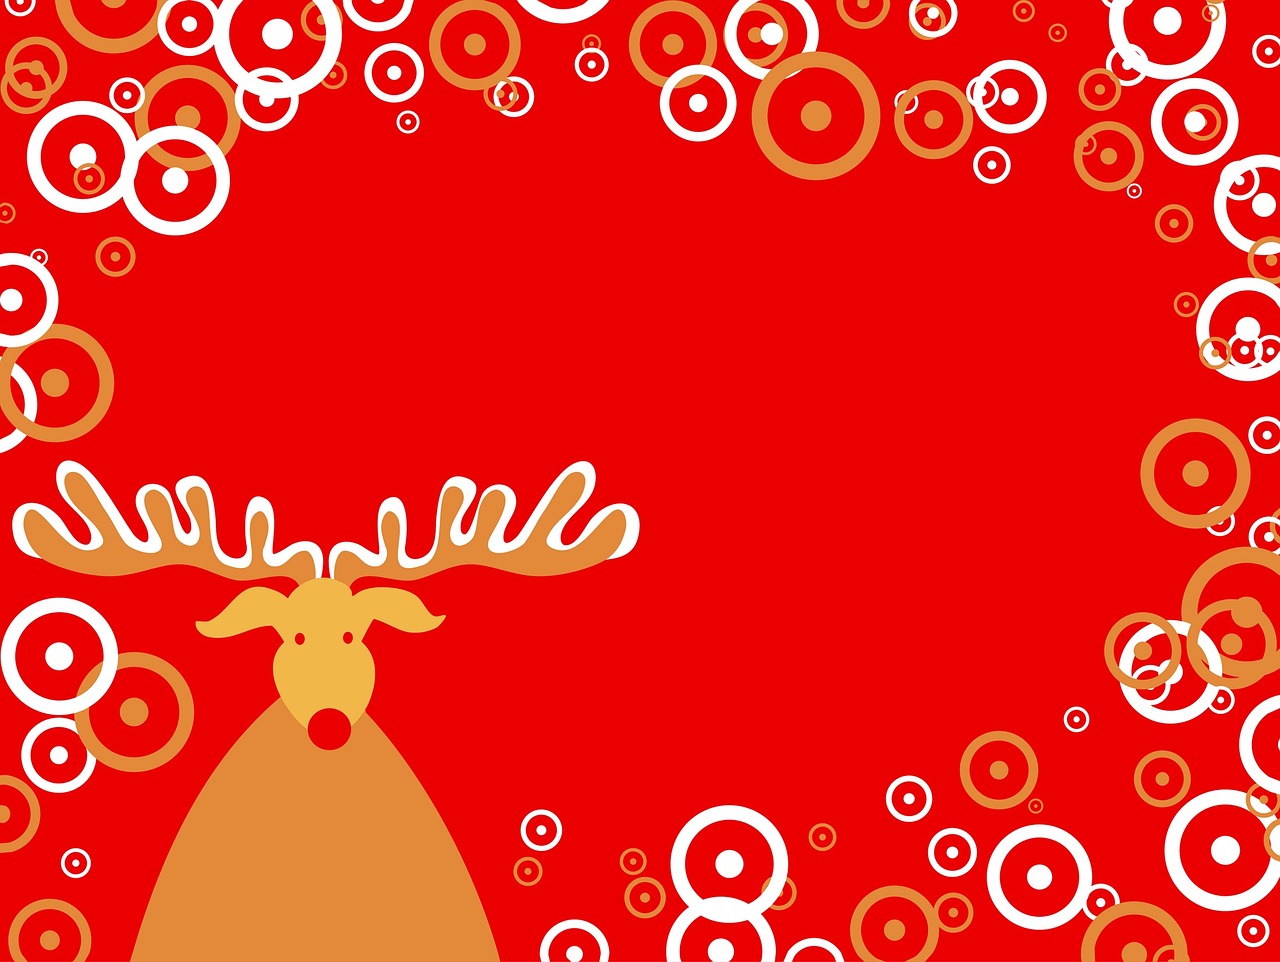 reindeer holidays occasions free photo